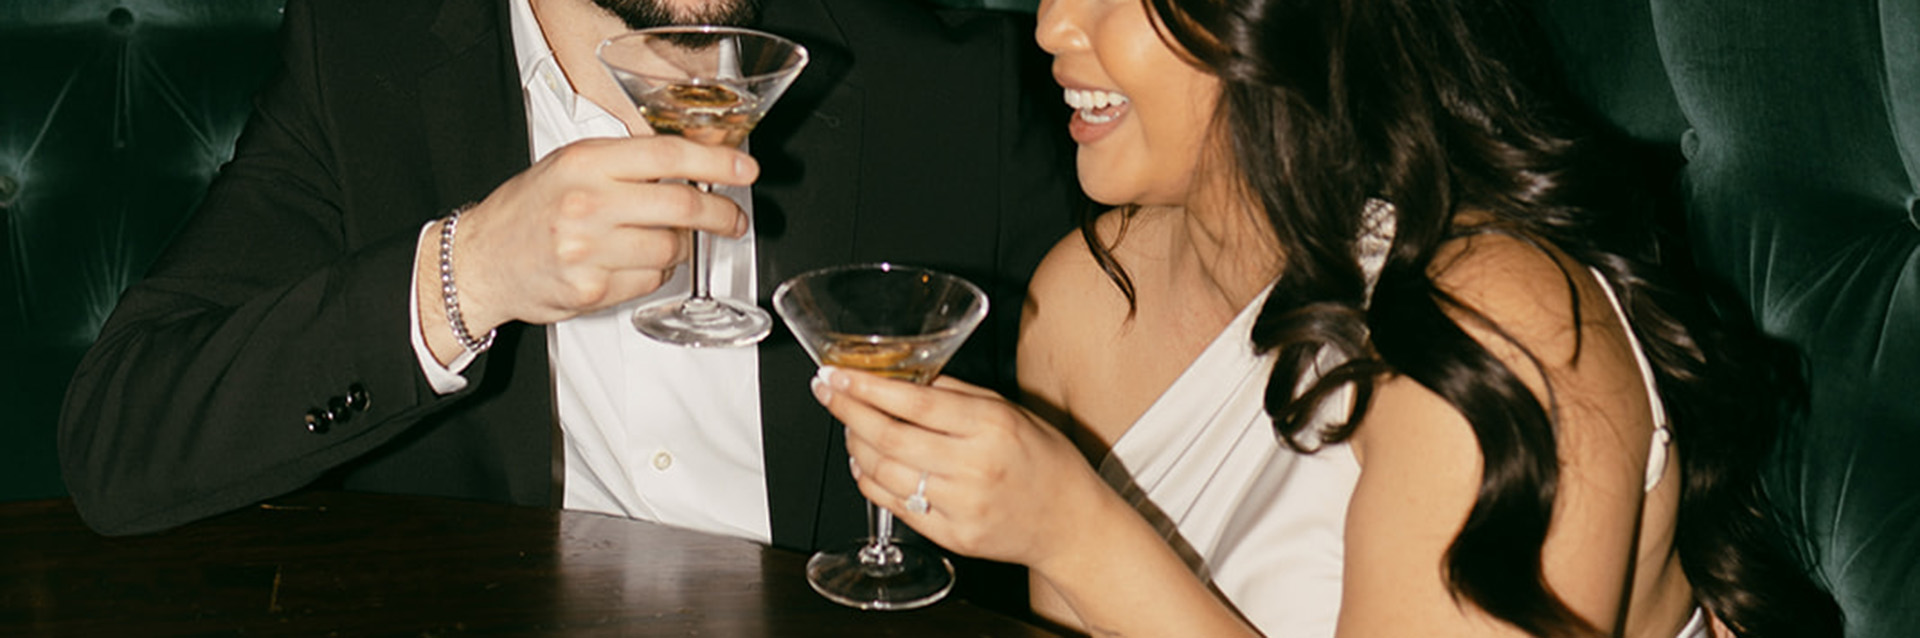 Couple toasting with martinis